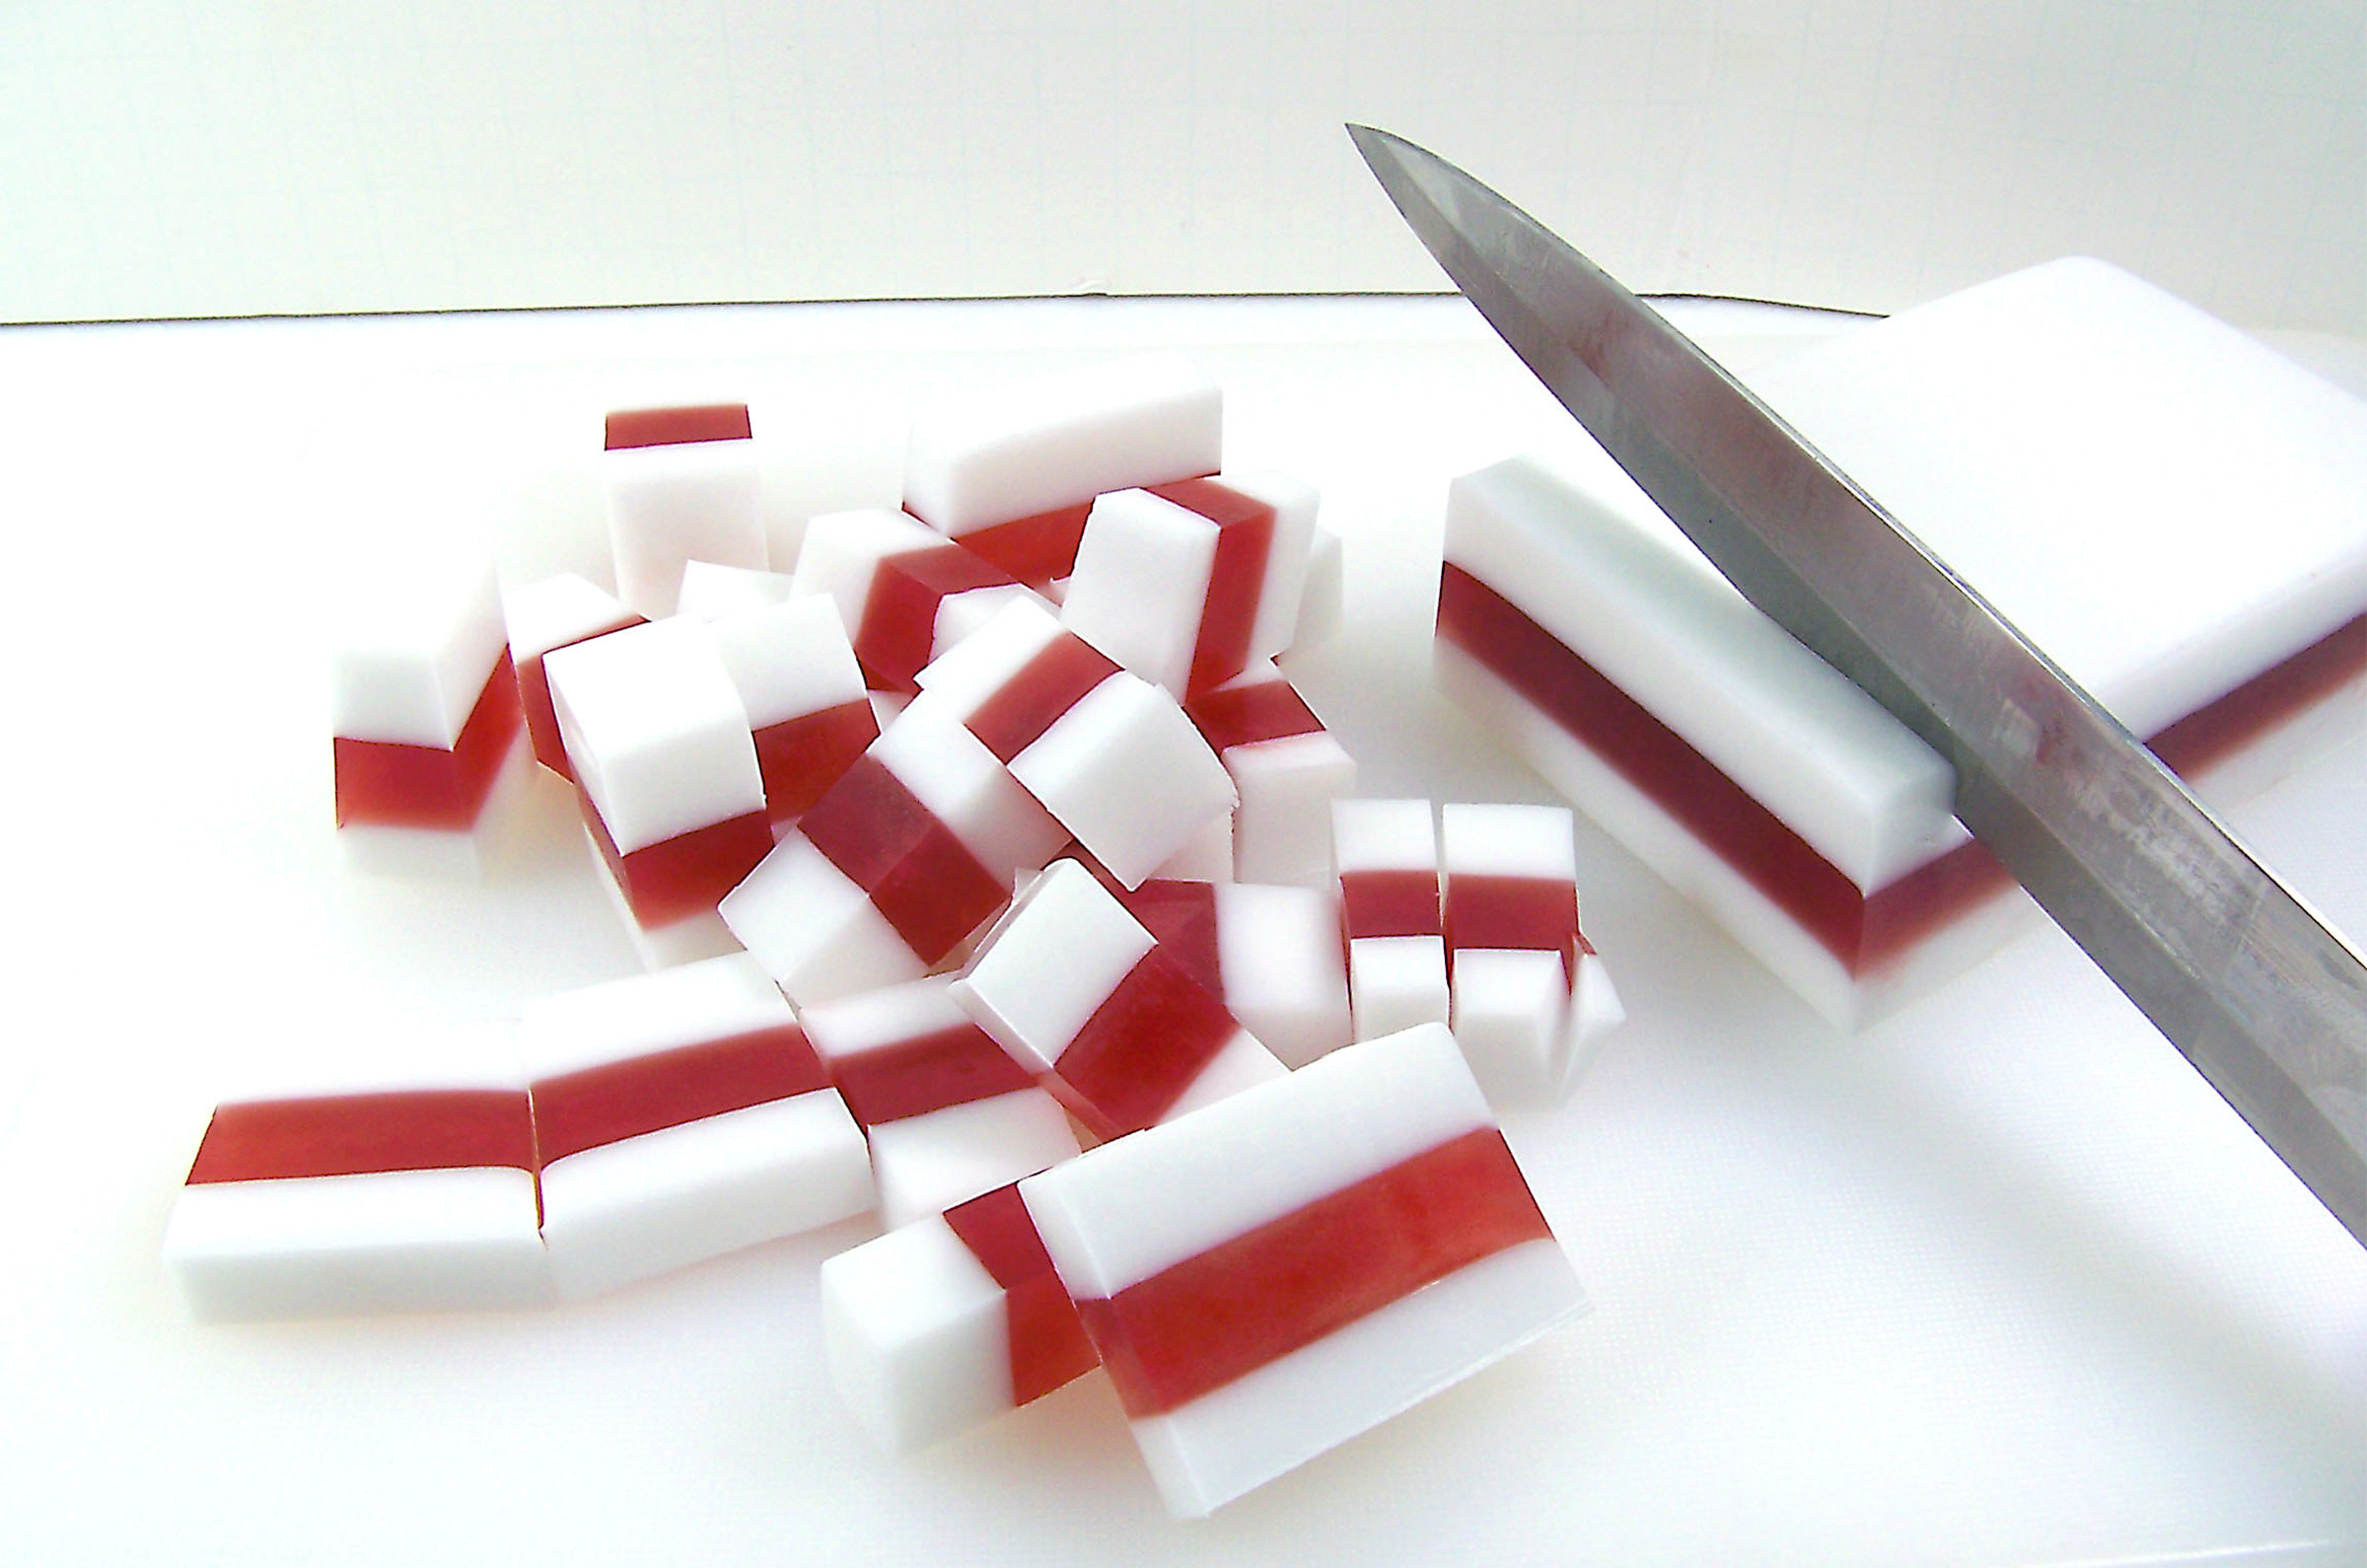 remove soap from mold and cut candy size pieces